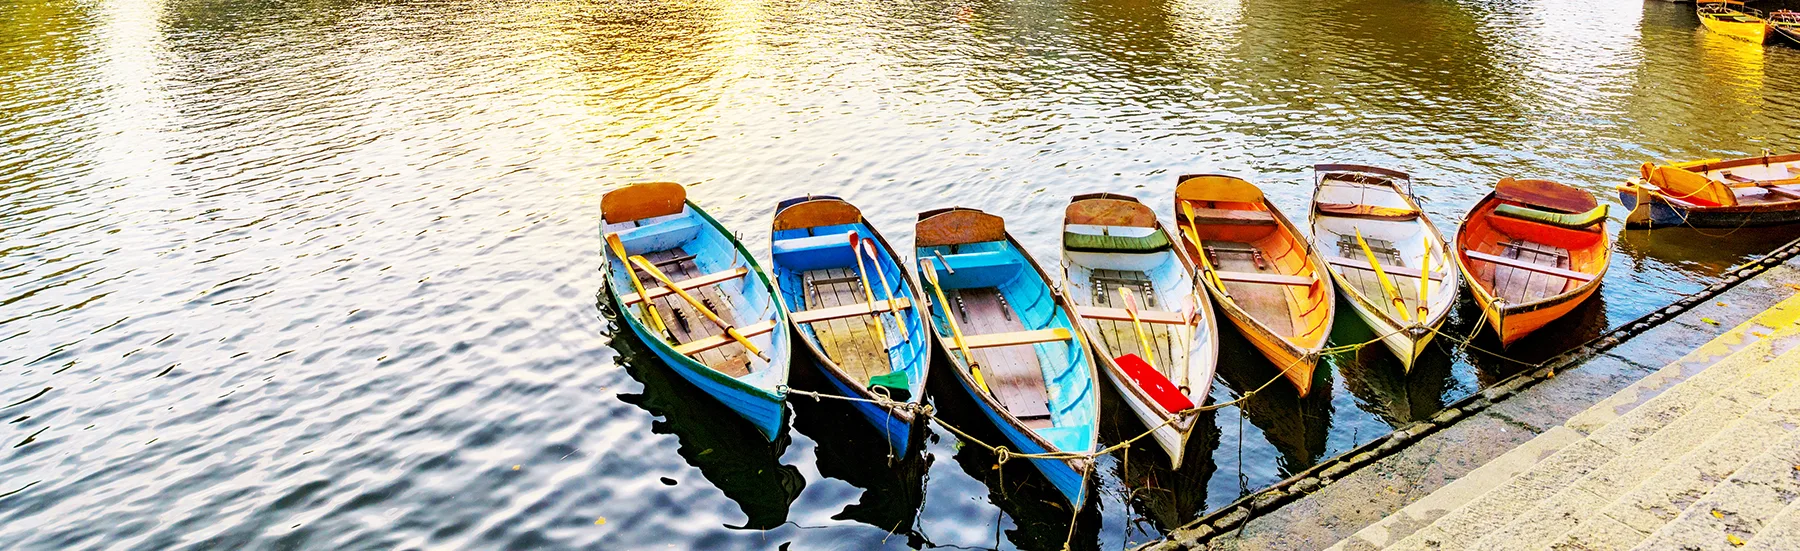 Colourful rowing boats moored on a river with a low stone bridge in the background. 